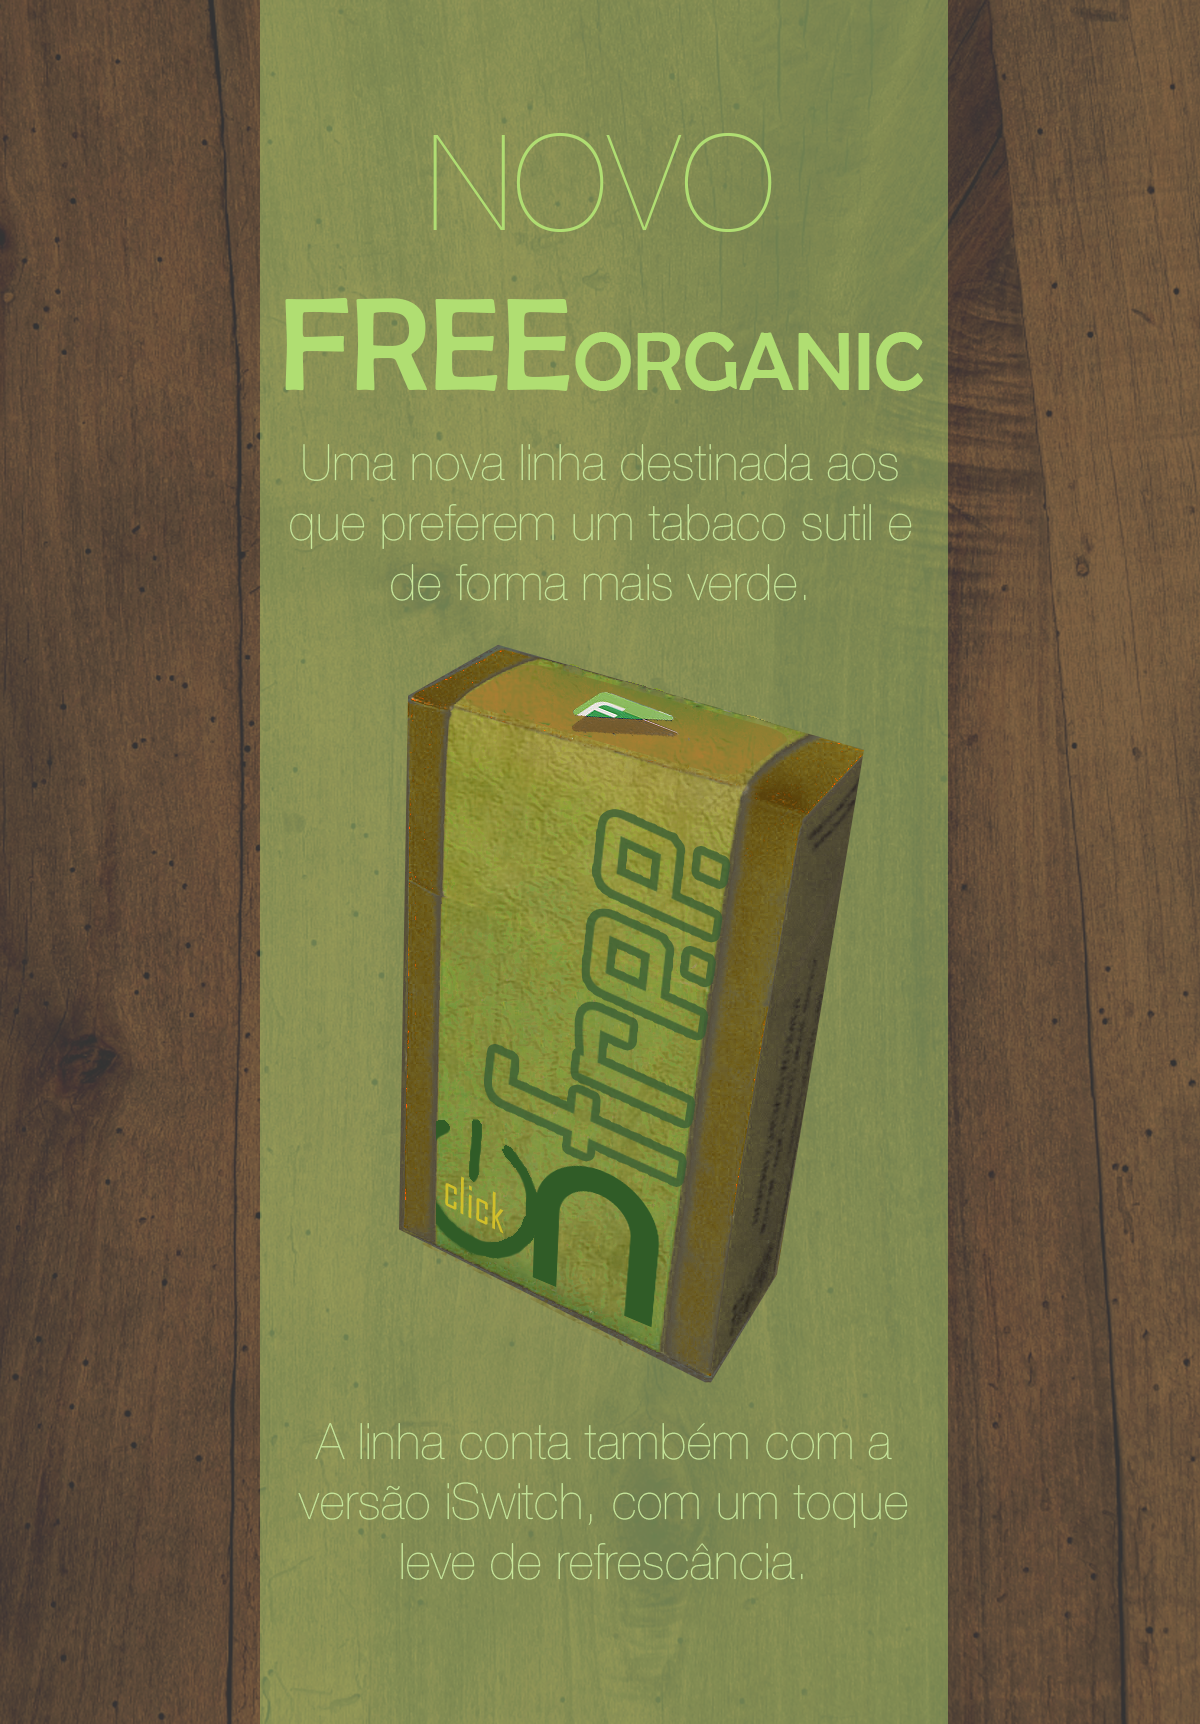 cigarette package redesign new organic green